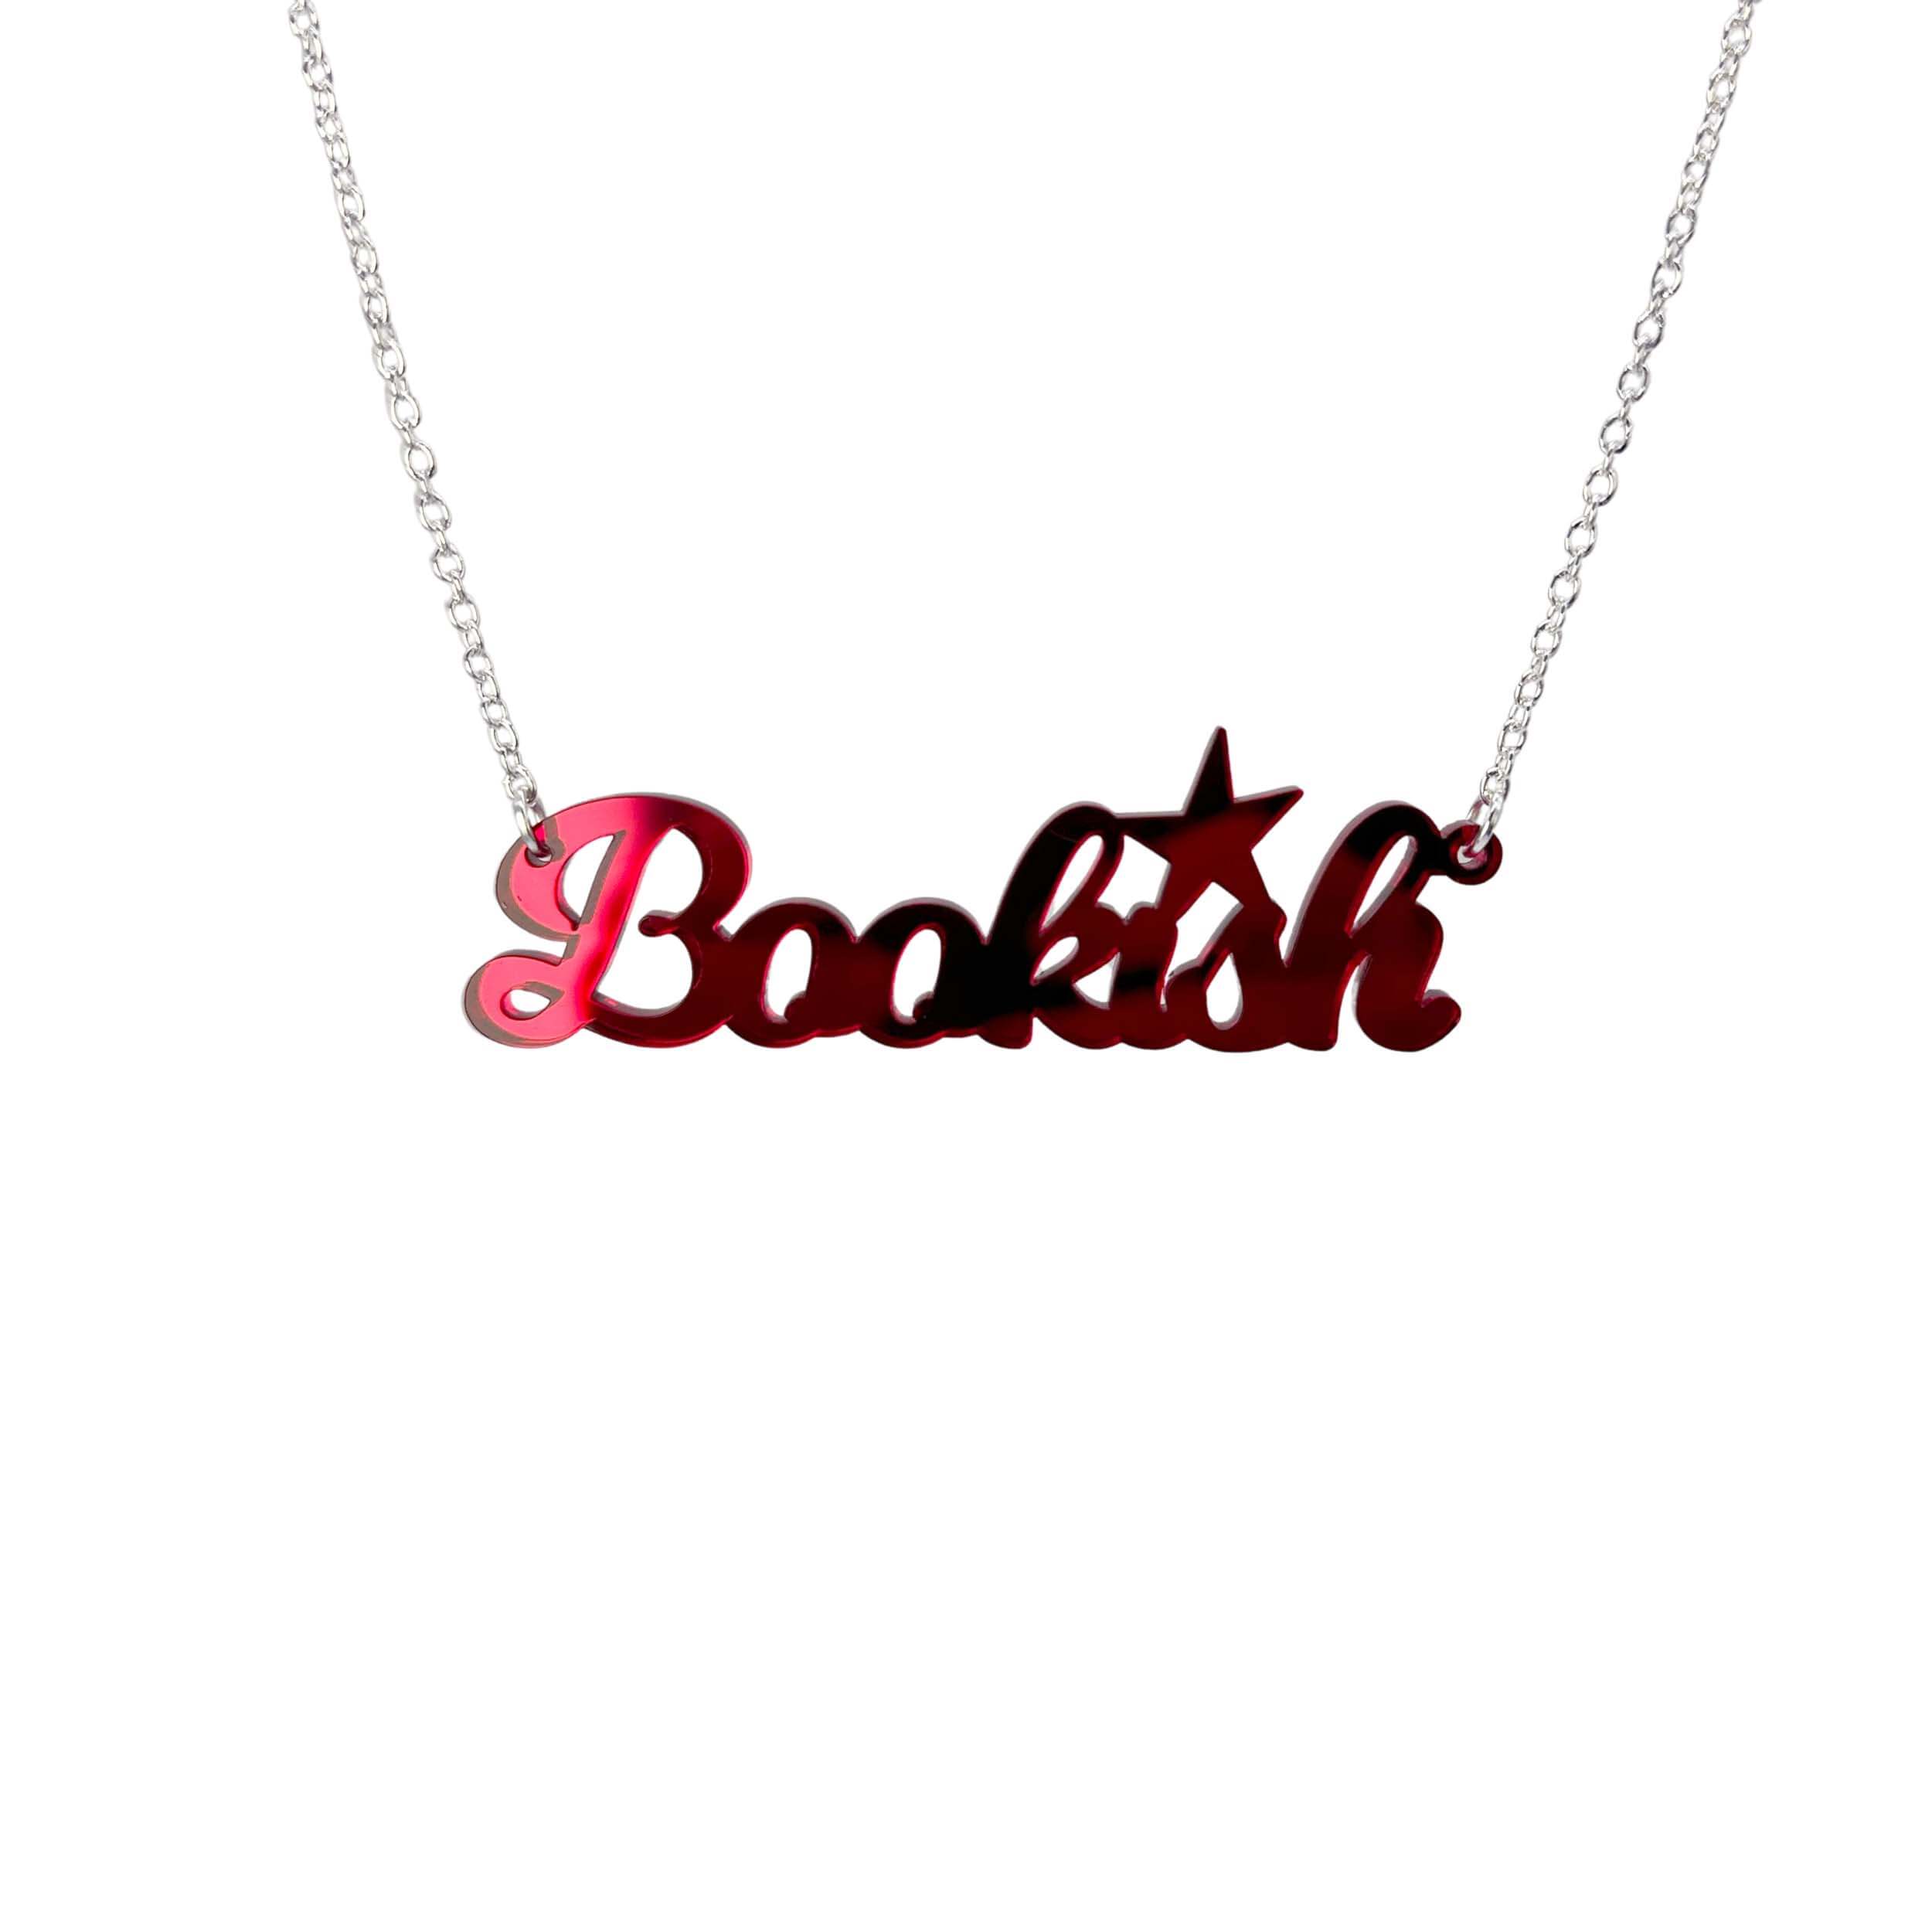 Ruby red mirror bookish necklace